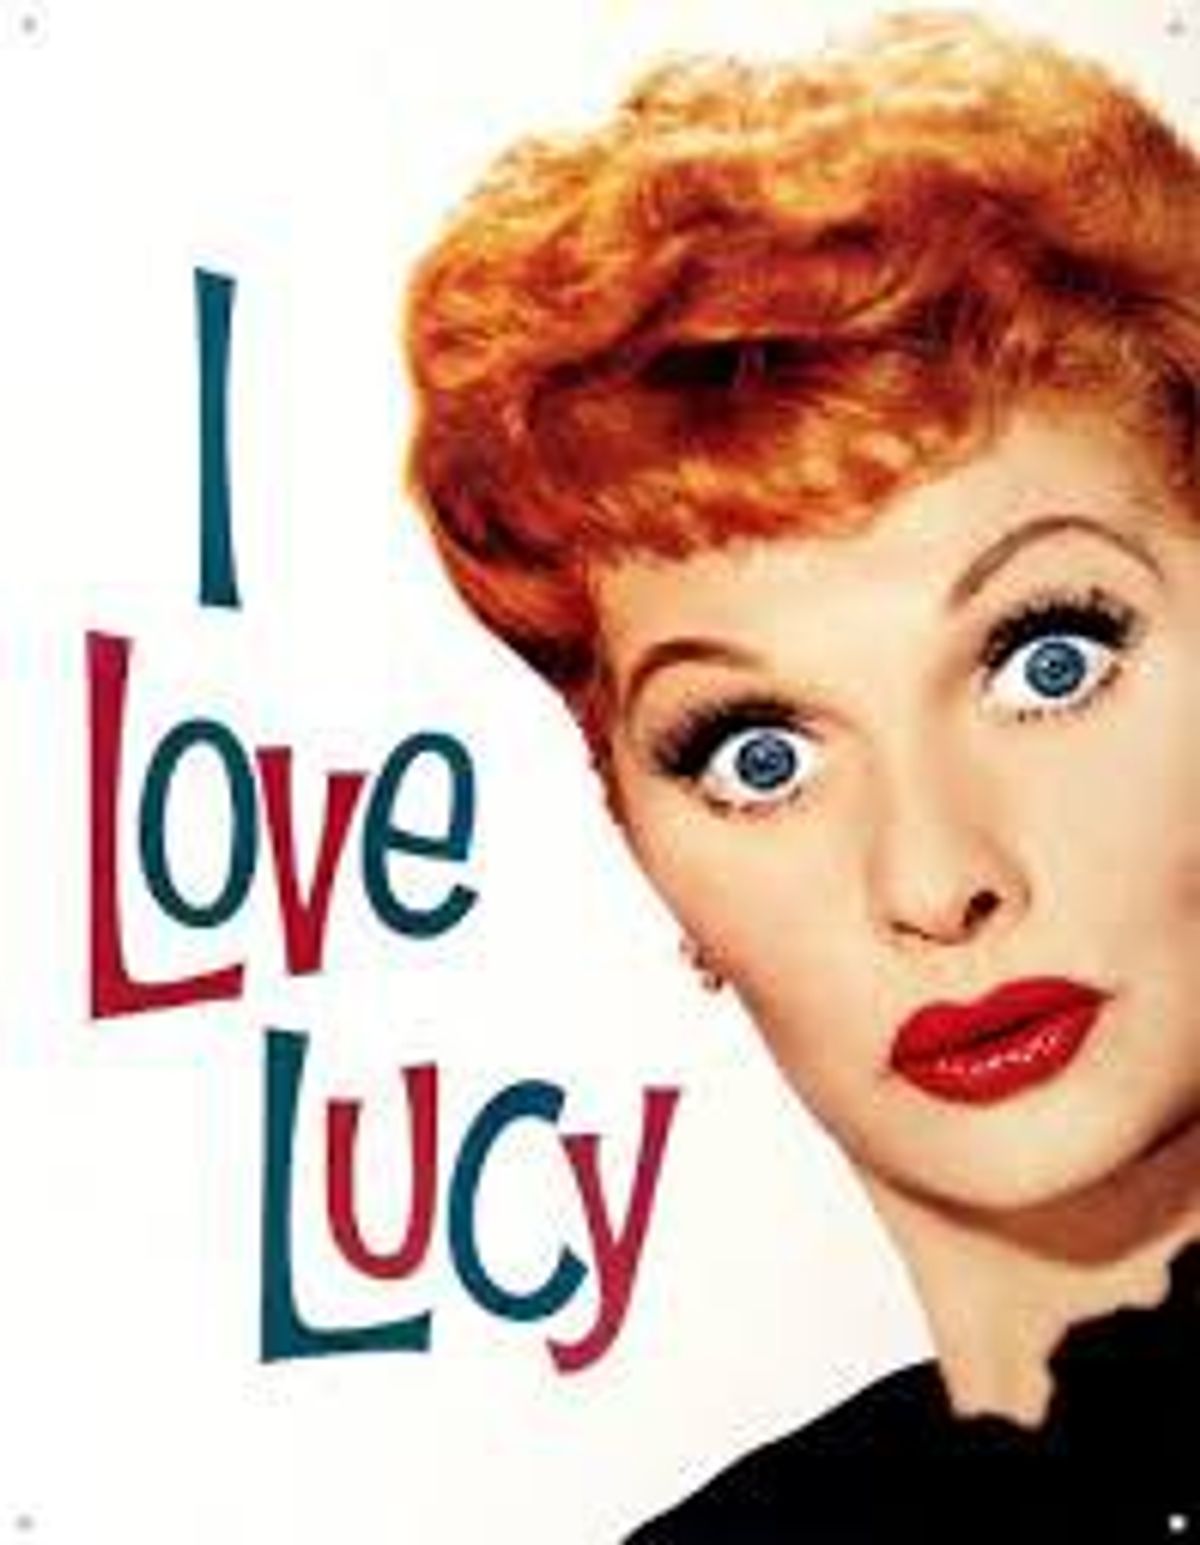 Boredom During Summer As Told By 'I Love Lucy'